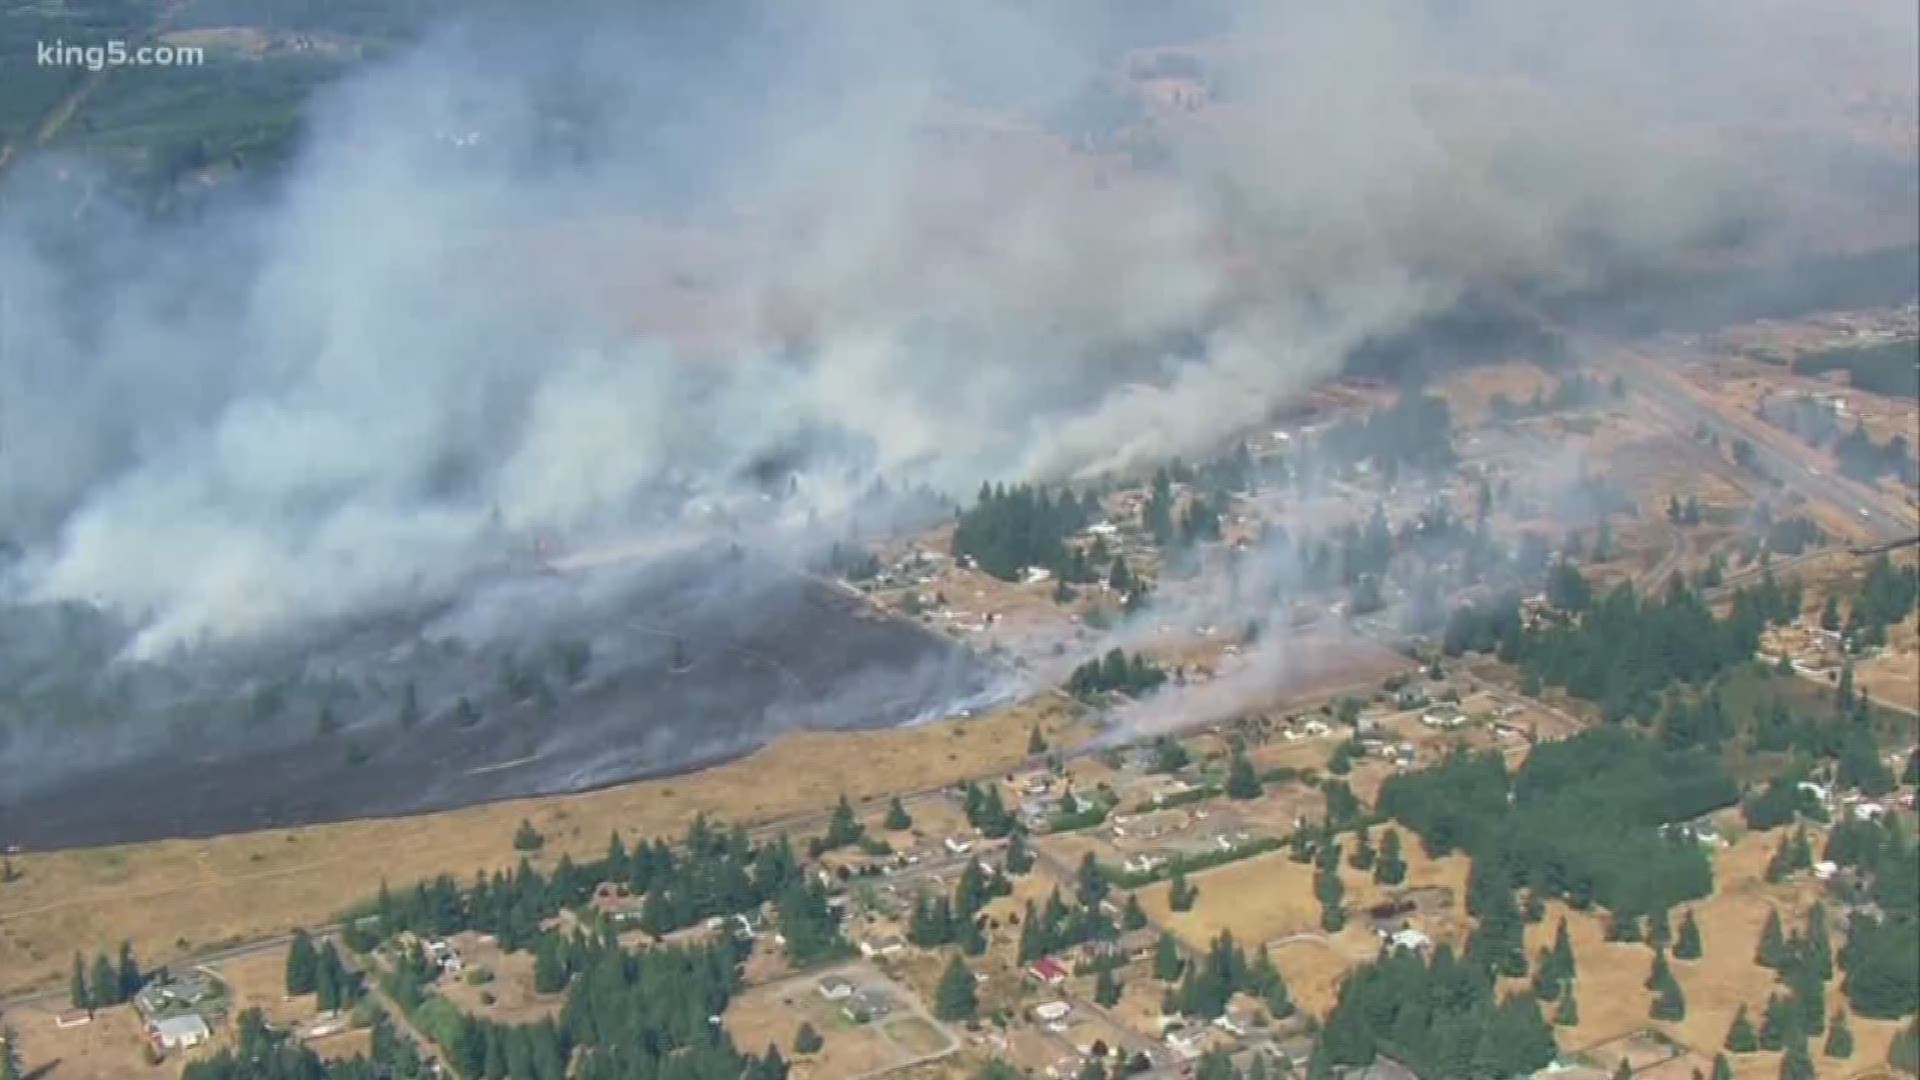 Wildfires are predicted to be worse than usual this summer in Washington State... on both sides of the mountains.